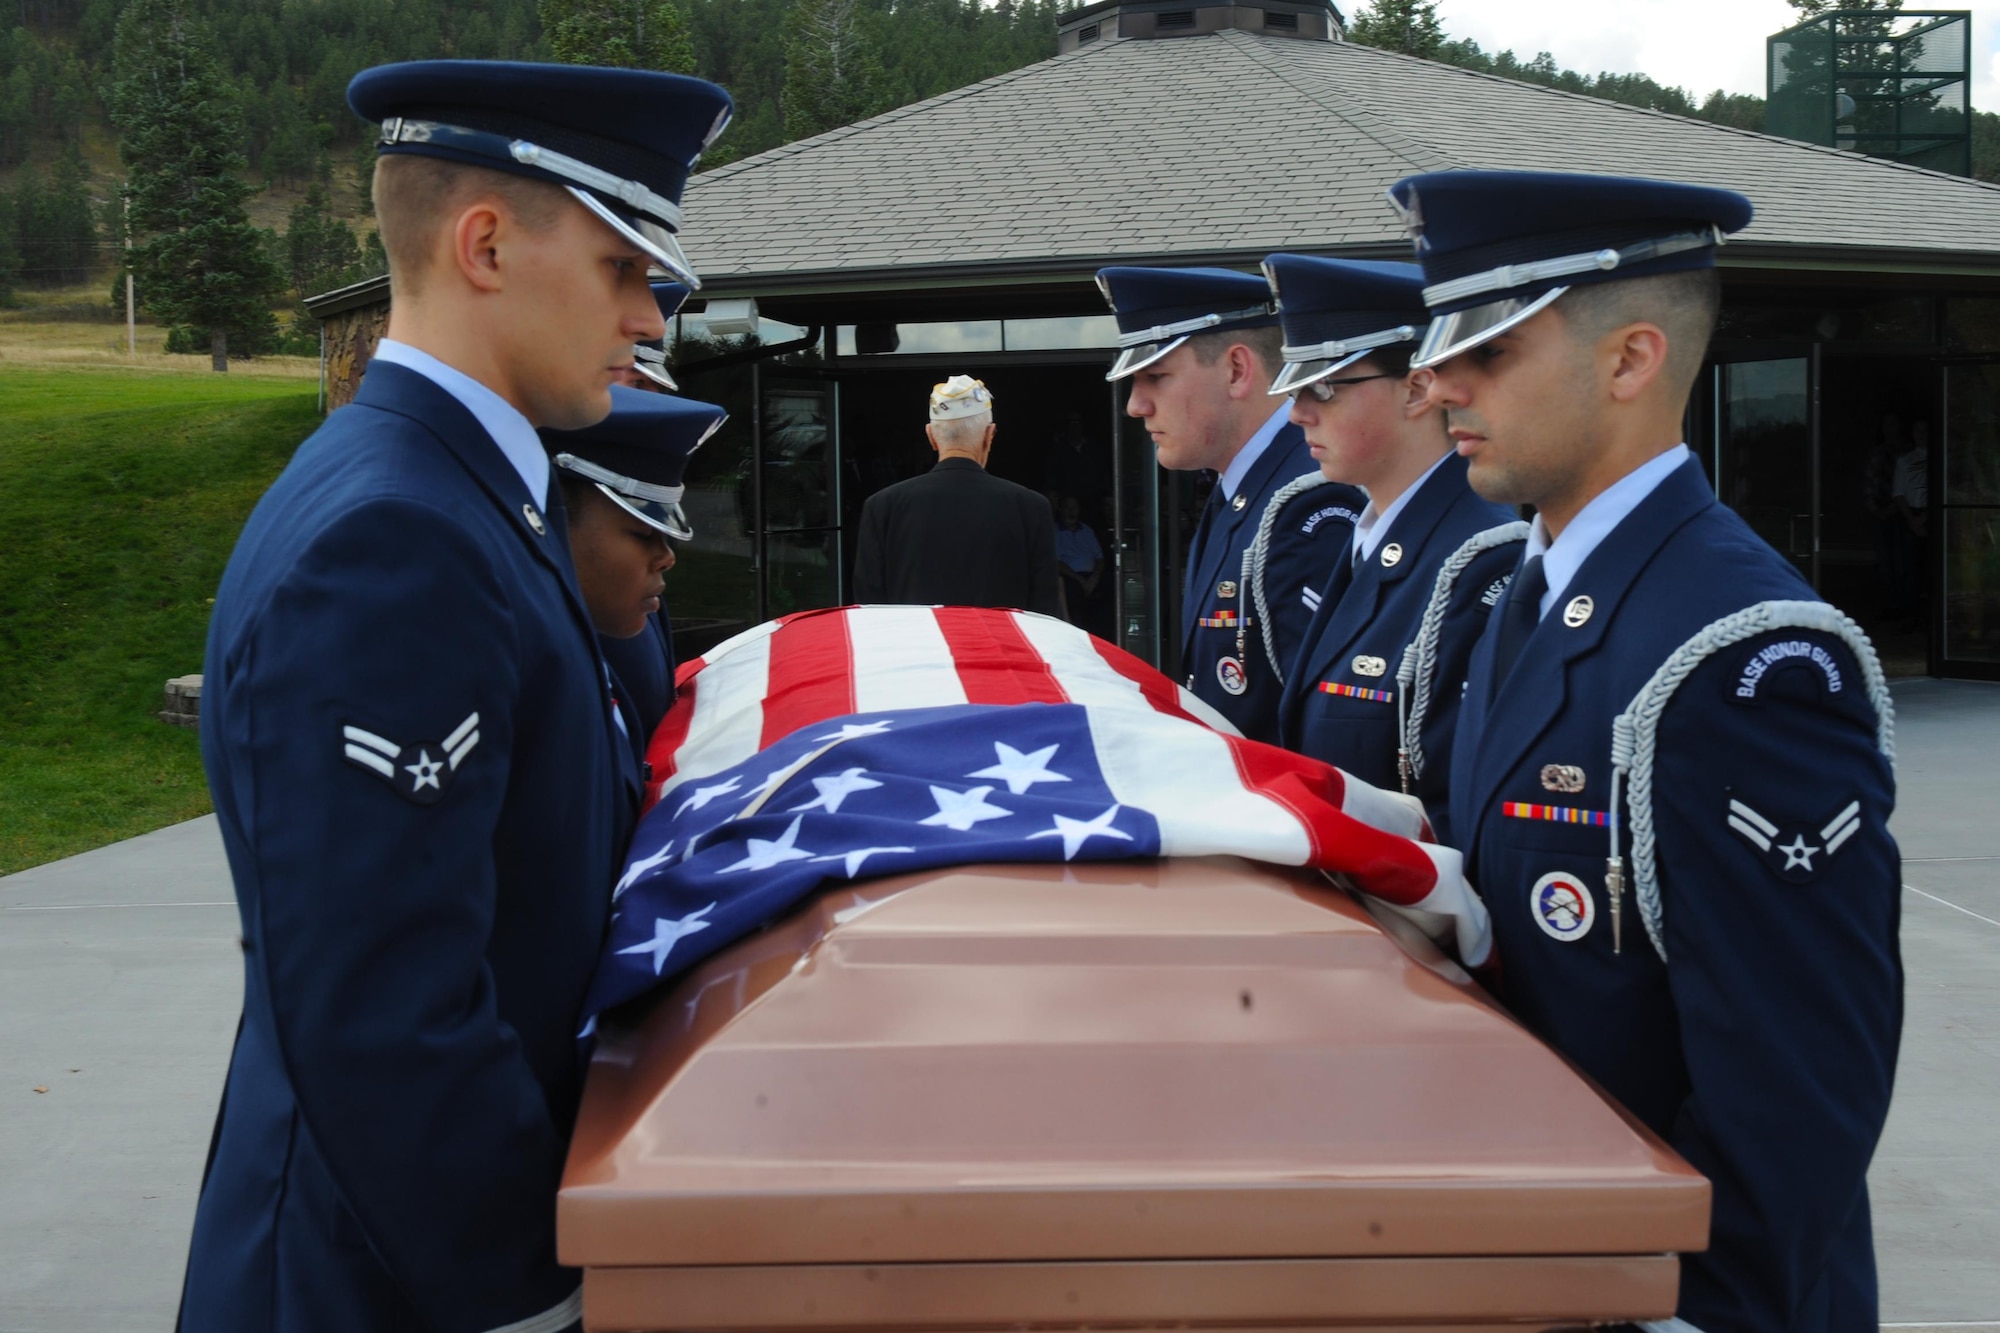 Airmen from the Ellsworth Air Force Base Honor Guard carry the remains of a retired service member during a funeral at Black Hills National Cemetery in Sturgis, S.D., Sept. 26, 2017. Ellsworth’s honor guard covers 114,603 miles and 81 counties throughout South Dakota, Wyoming and Nebraska. (U.S. Air Force photo by Airman Nicolas Z. Erwin)